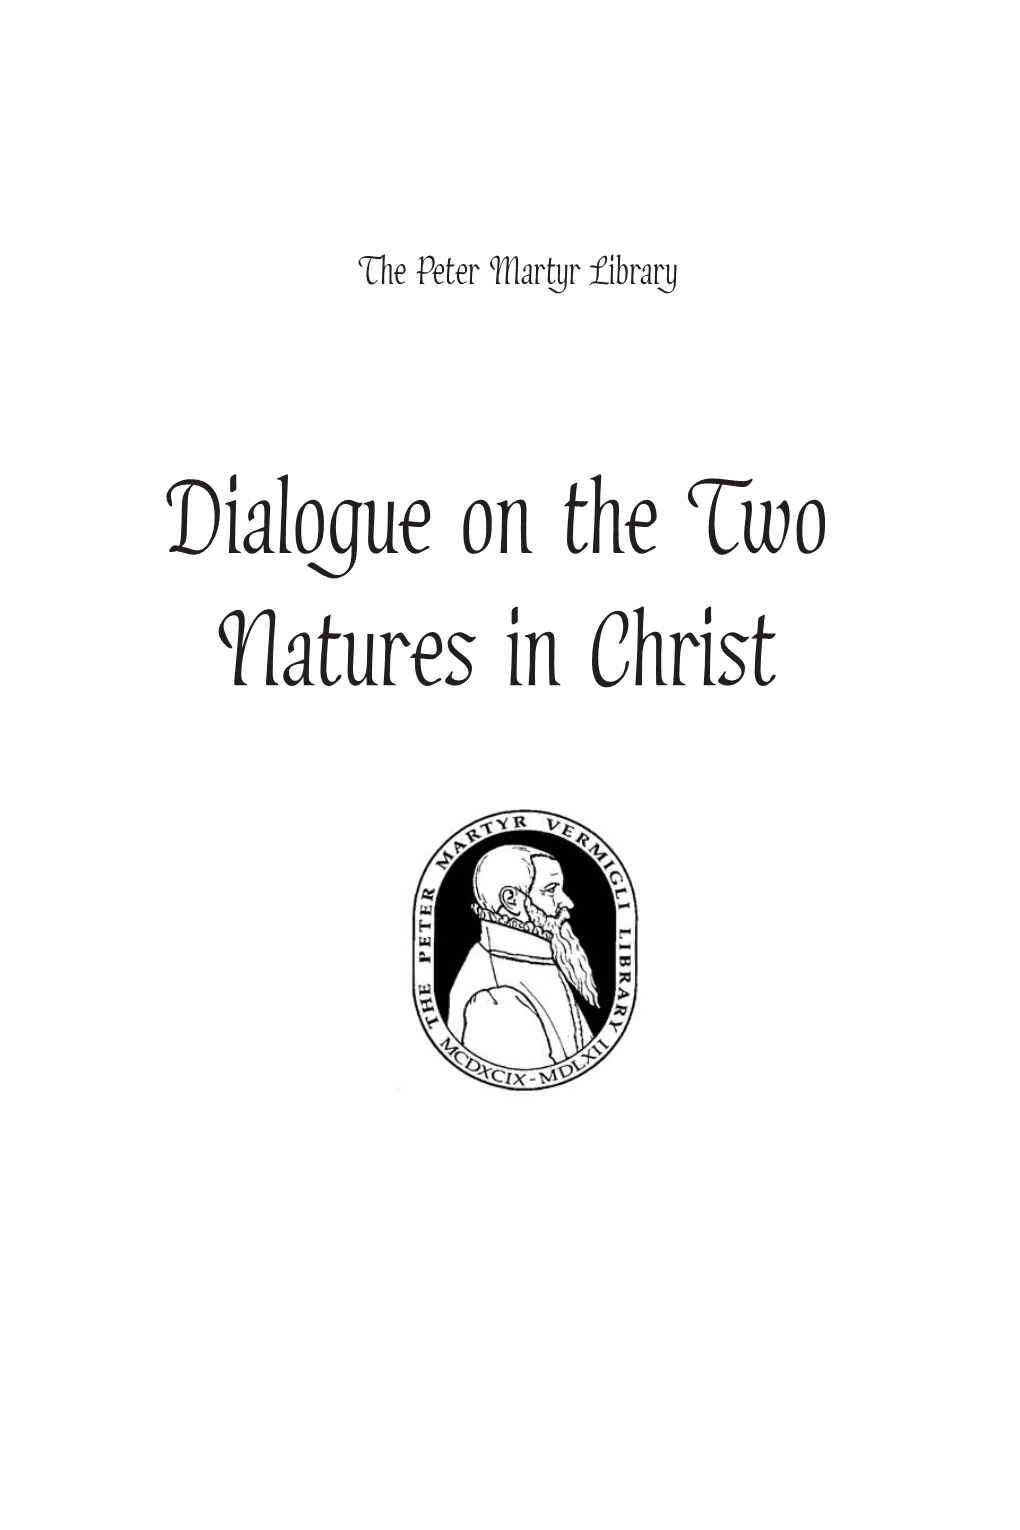 Dialogue on the Two Natures in Christ